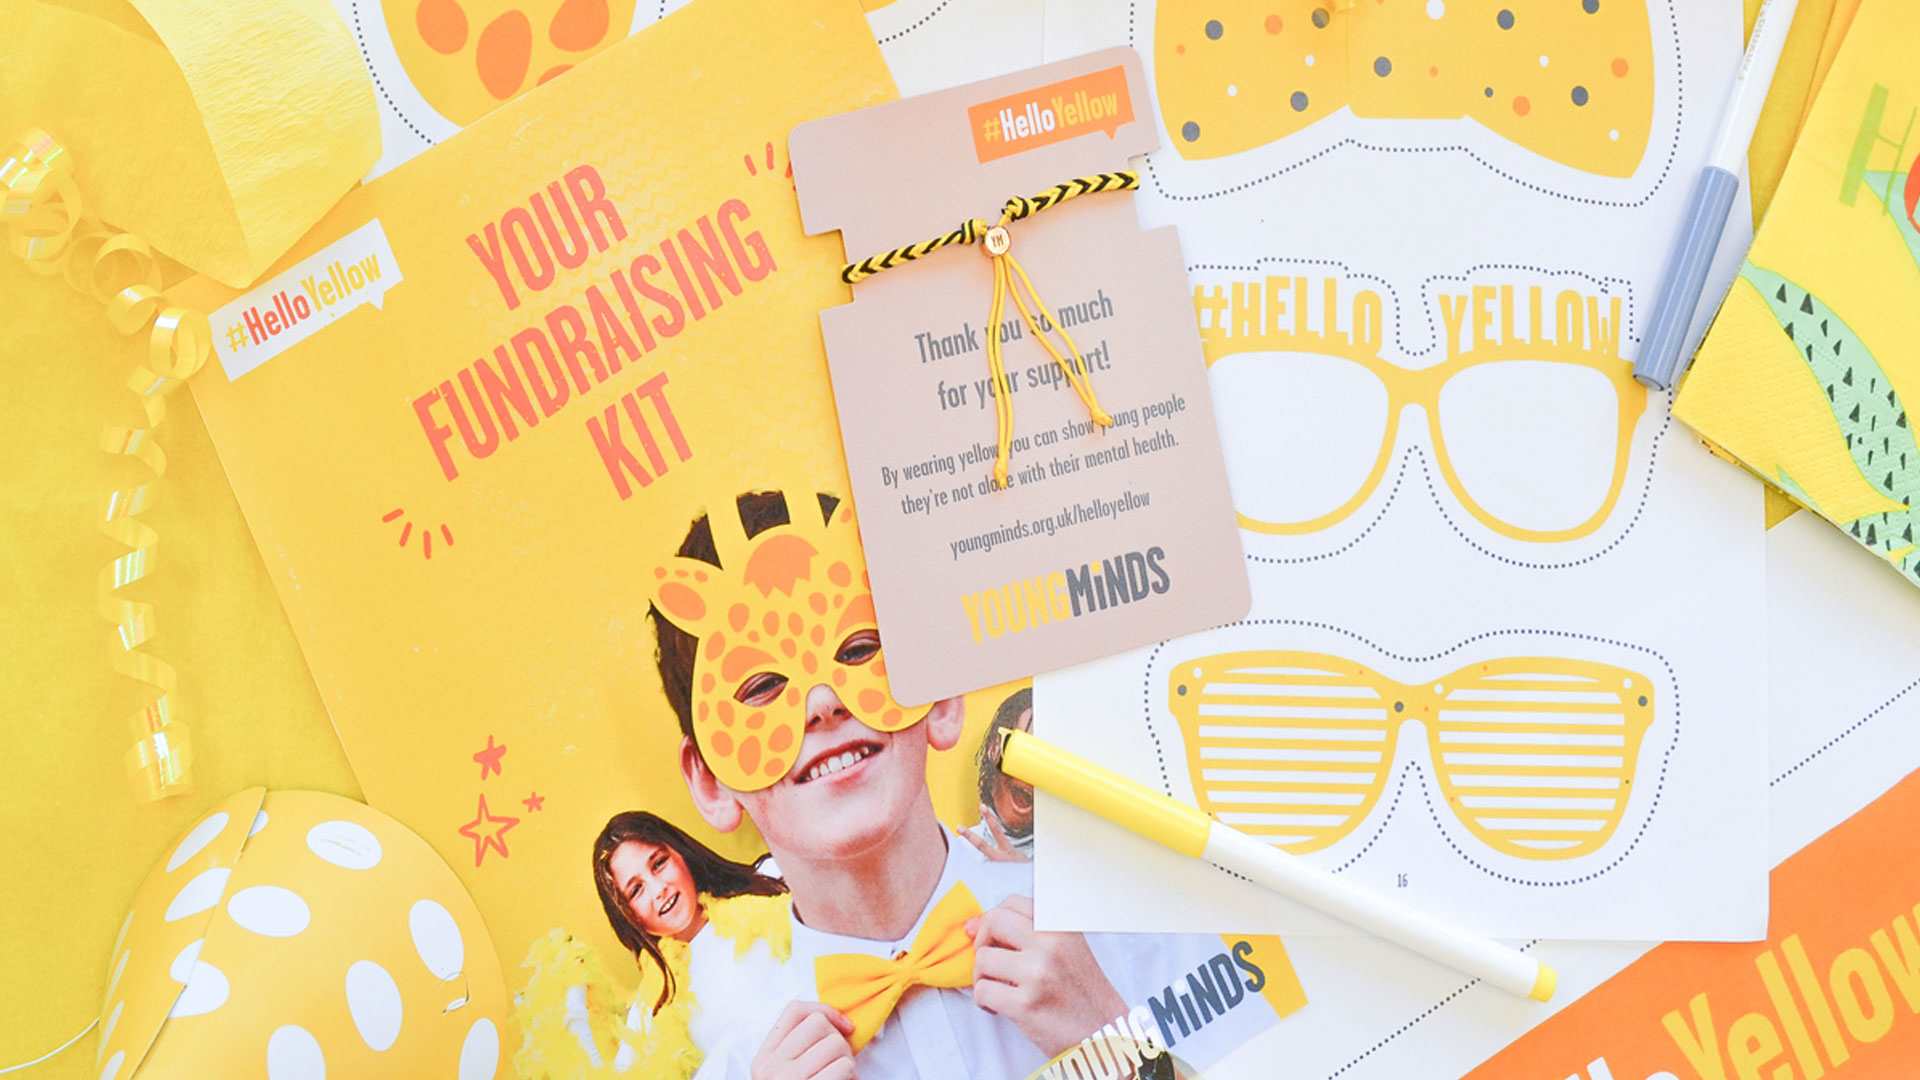 Image of Our #HelloYellow fundraising kit sits on top a yellow table. The table has pens, yellow ribbons and party hats around the kit.